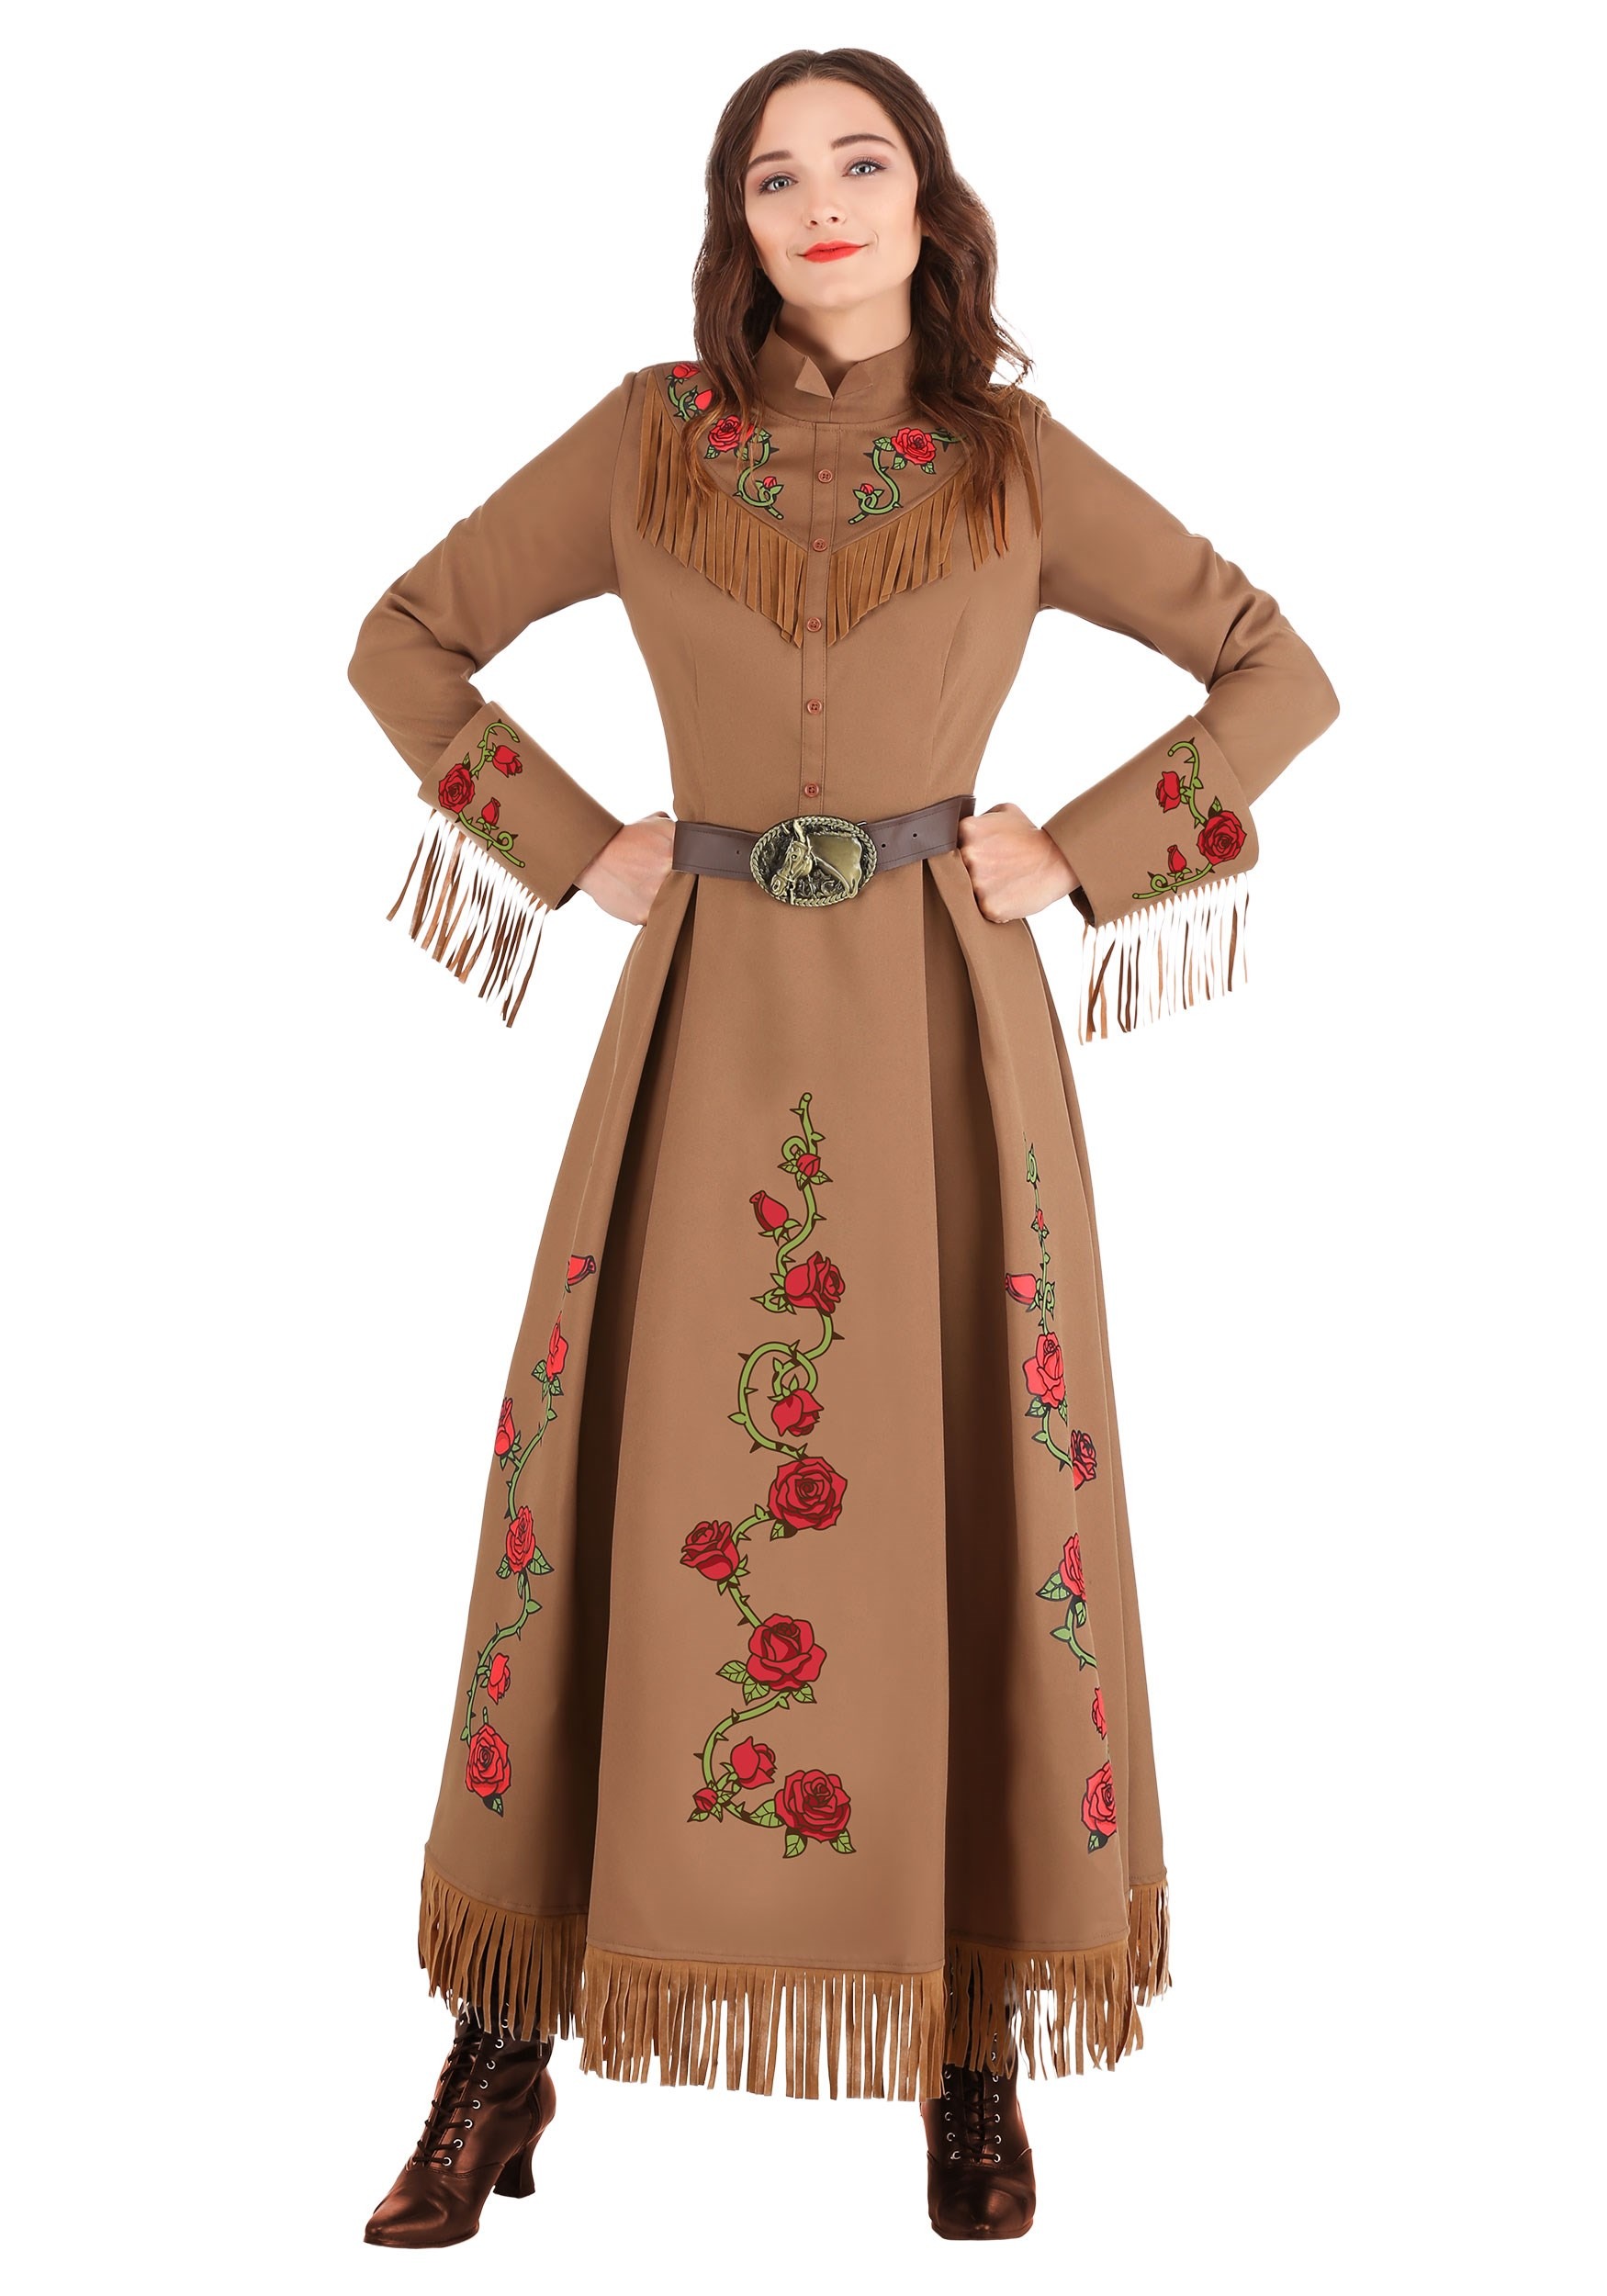 Annie Oakley Cowgirl Costume For Women , Historical Figure Costumes